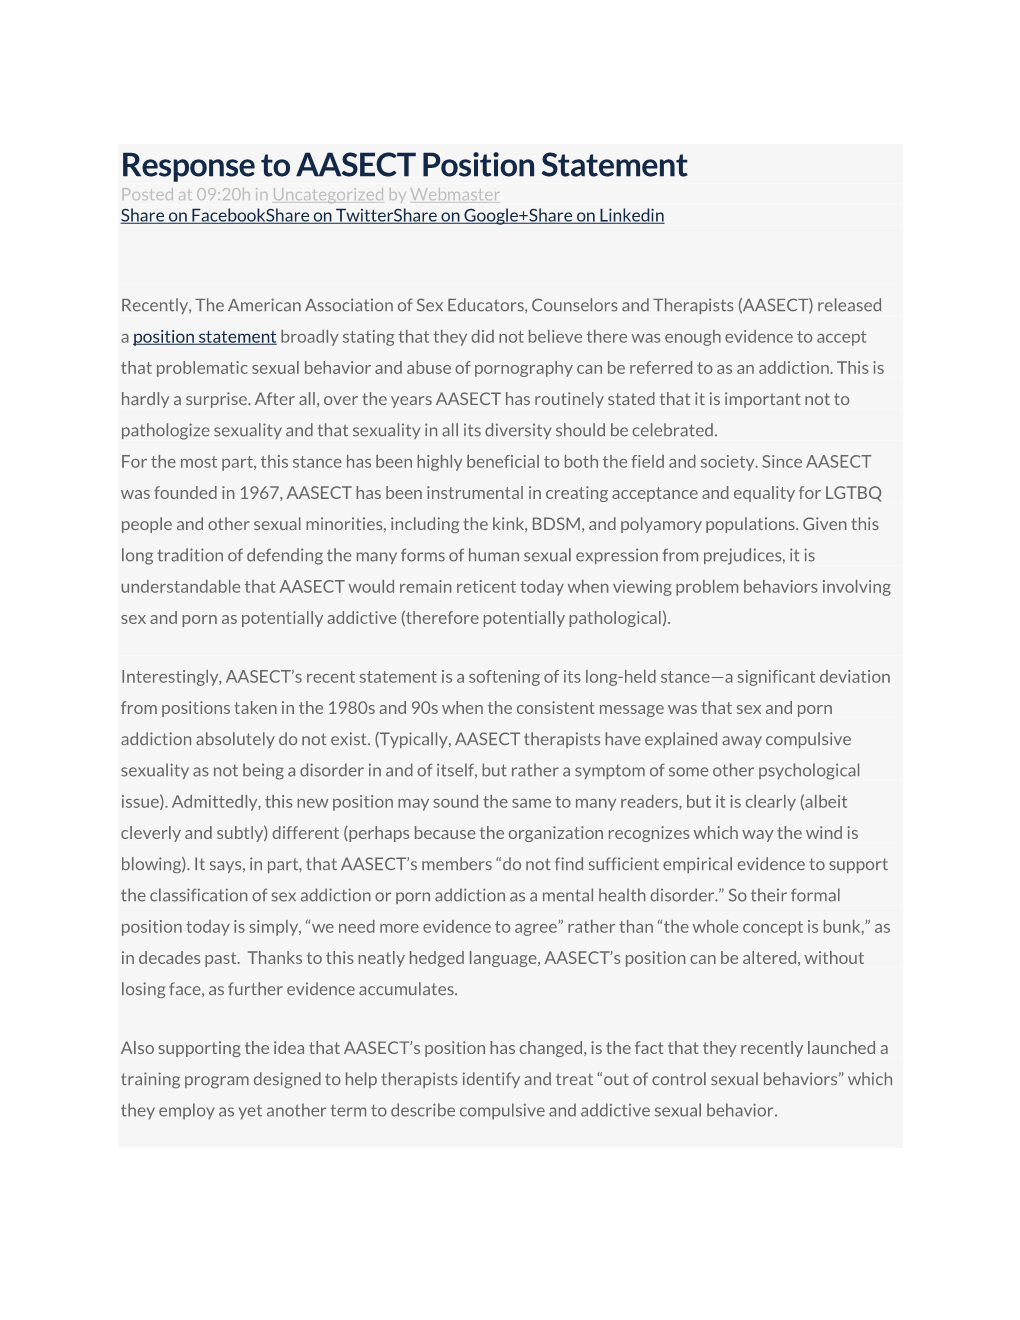 Response to AASECT Position Statement Posted at 09:20H in Uncategorized by Webmaster Share on Facebookshare on Twittershare on Google+Share on Linkedin